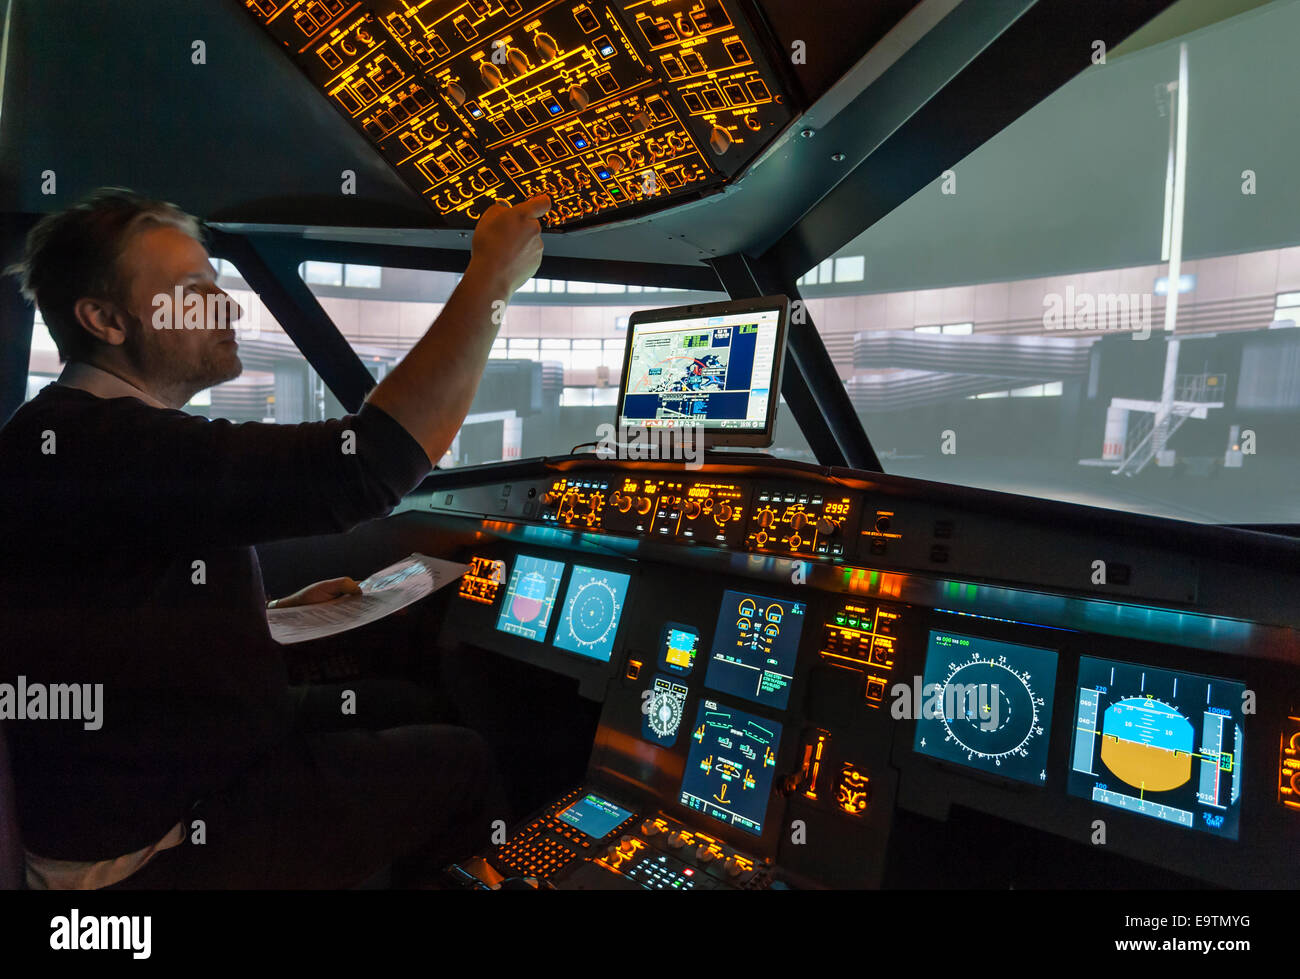 Airbus A320 Cockpit Takeoff